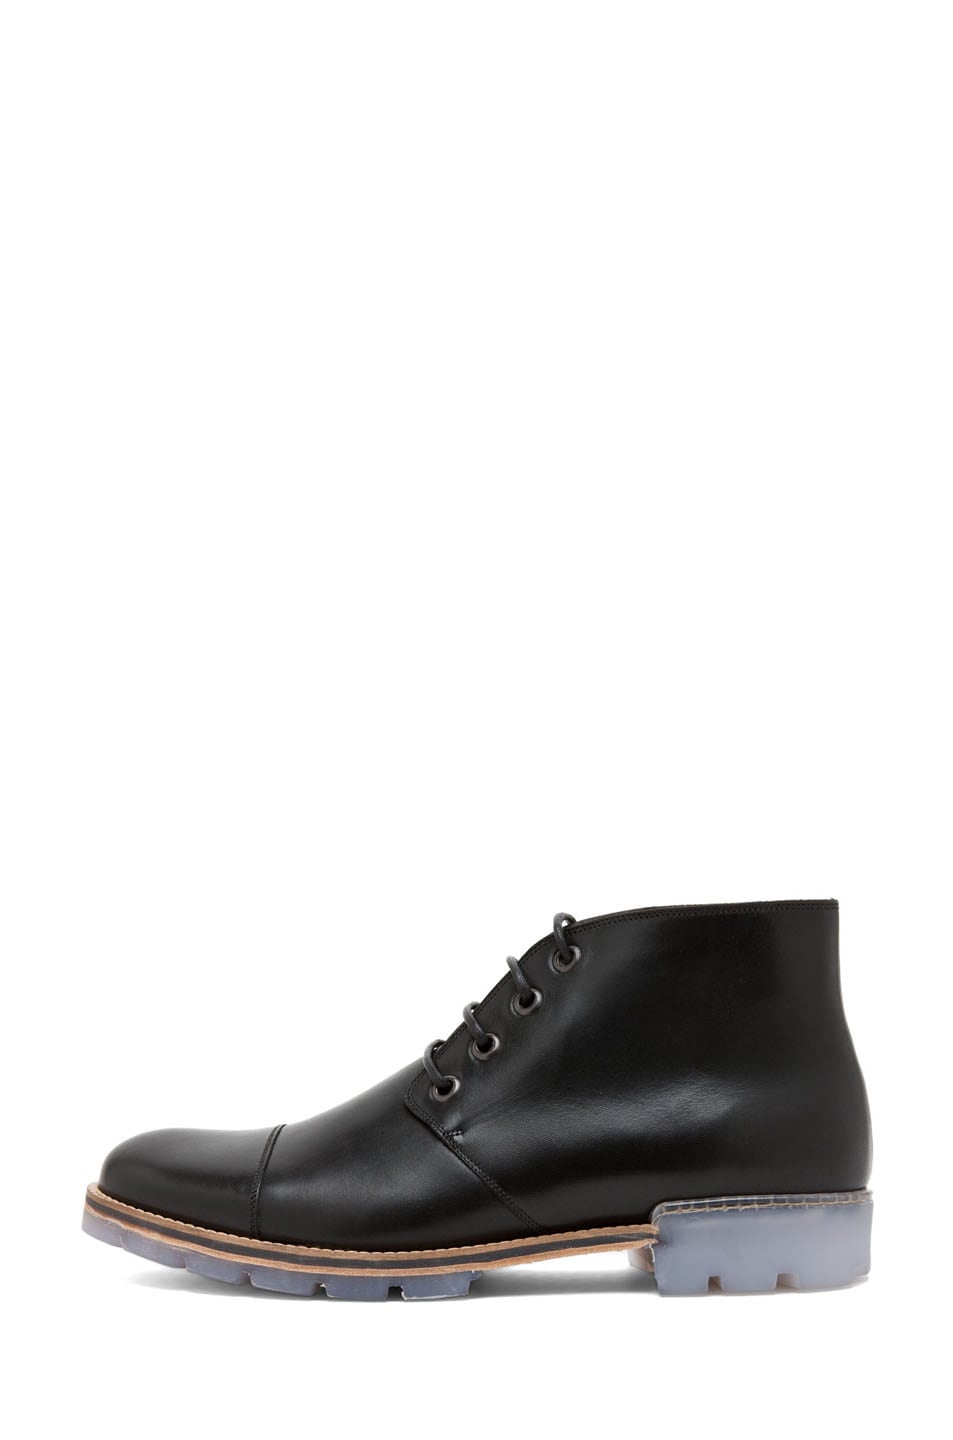 Marc Jacobs Lace Up Boot in Black | FWRD